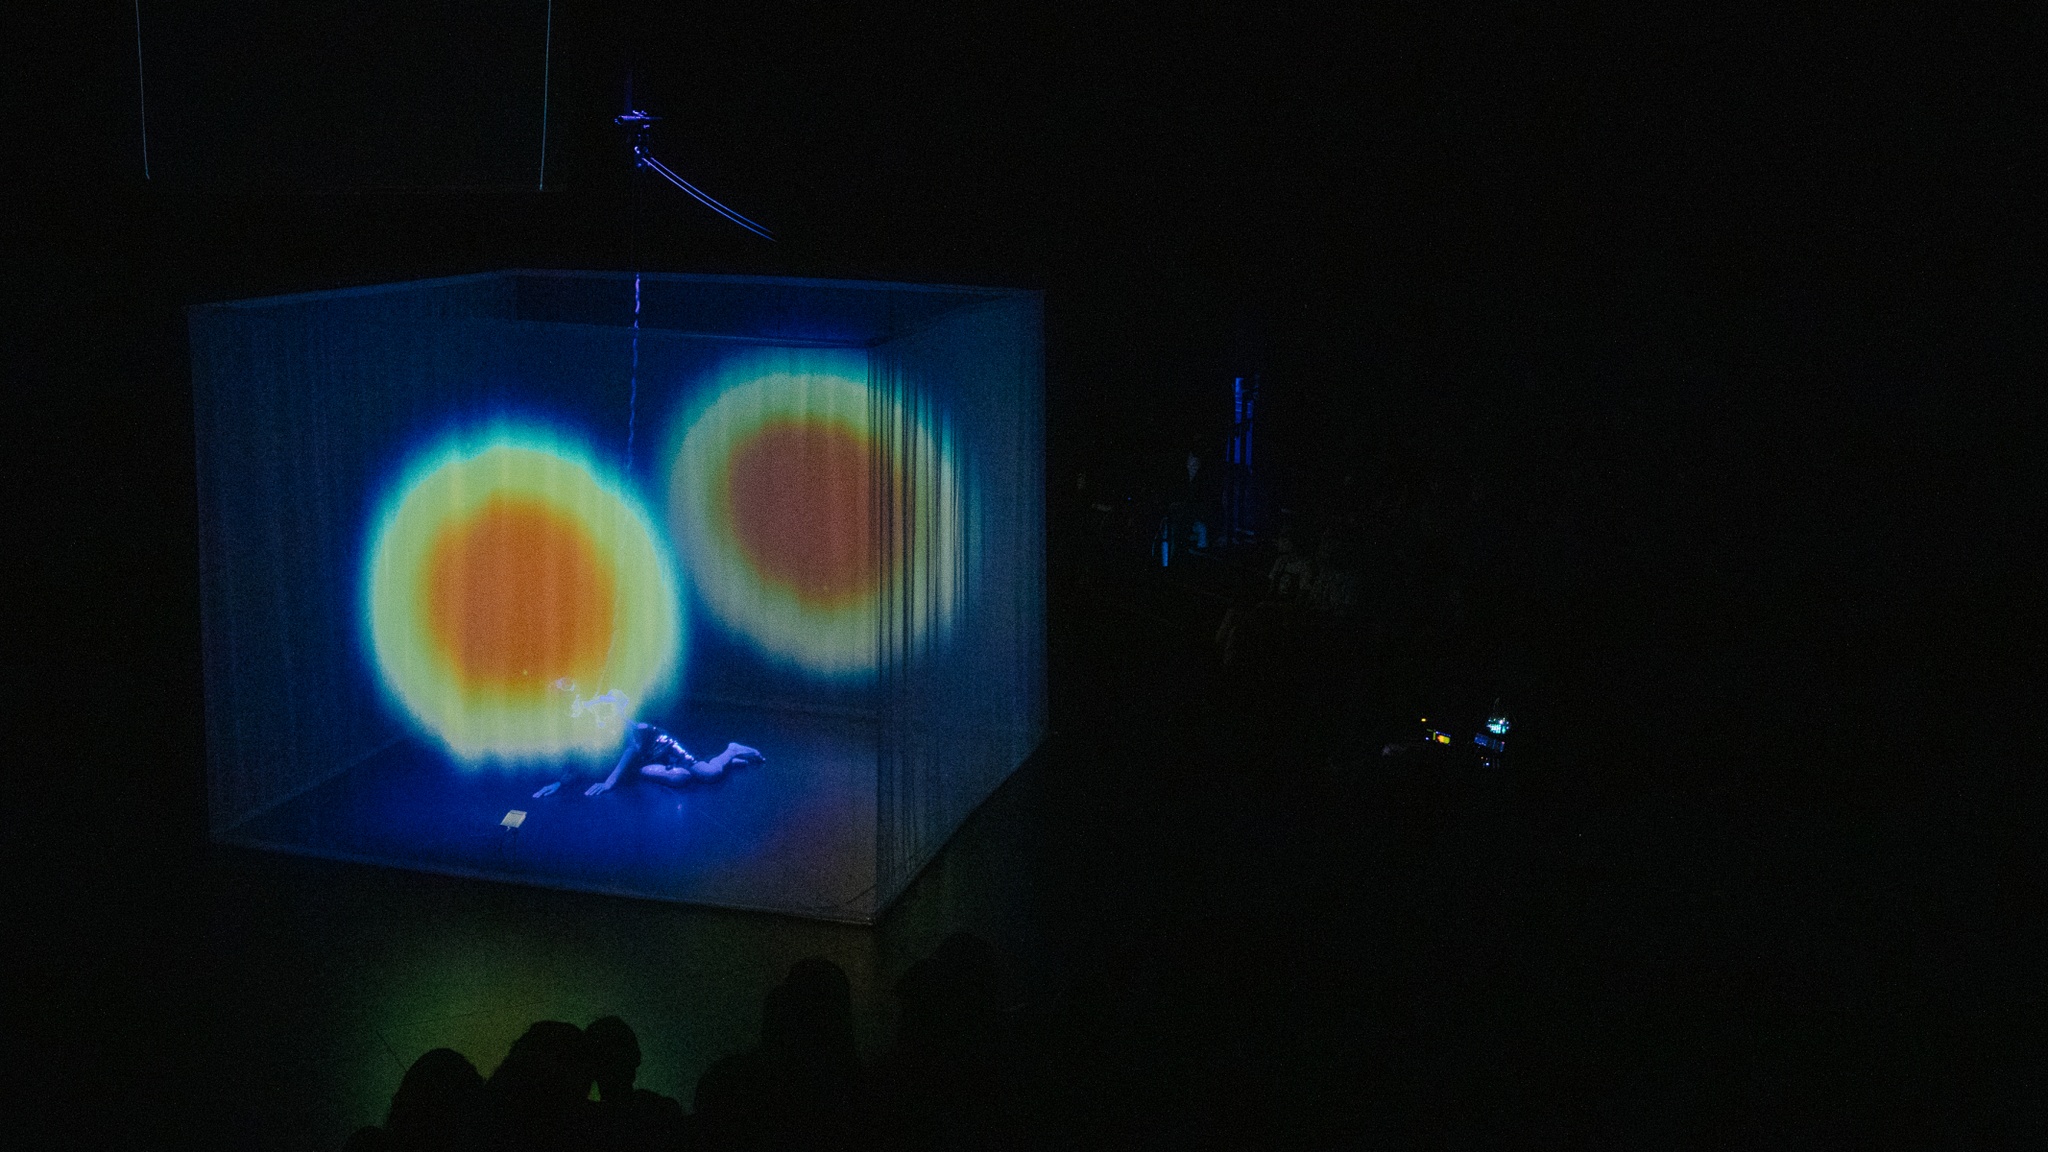 At the center of a darkened theater, sheer fabric hanging from the ceiling creates a cube on which a pulsating orange and green circle is projected. Through the fabric, a performer, the artist Yo-Yo Lin, can be seen wearing white lying on the floor.